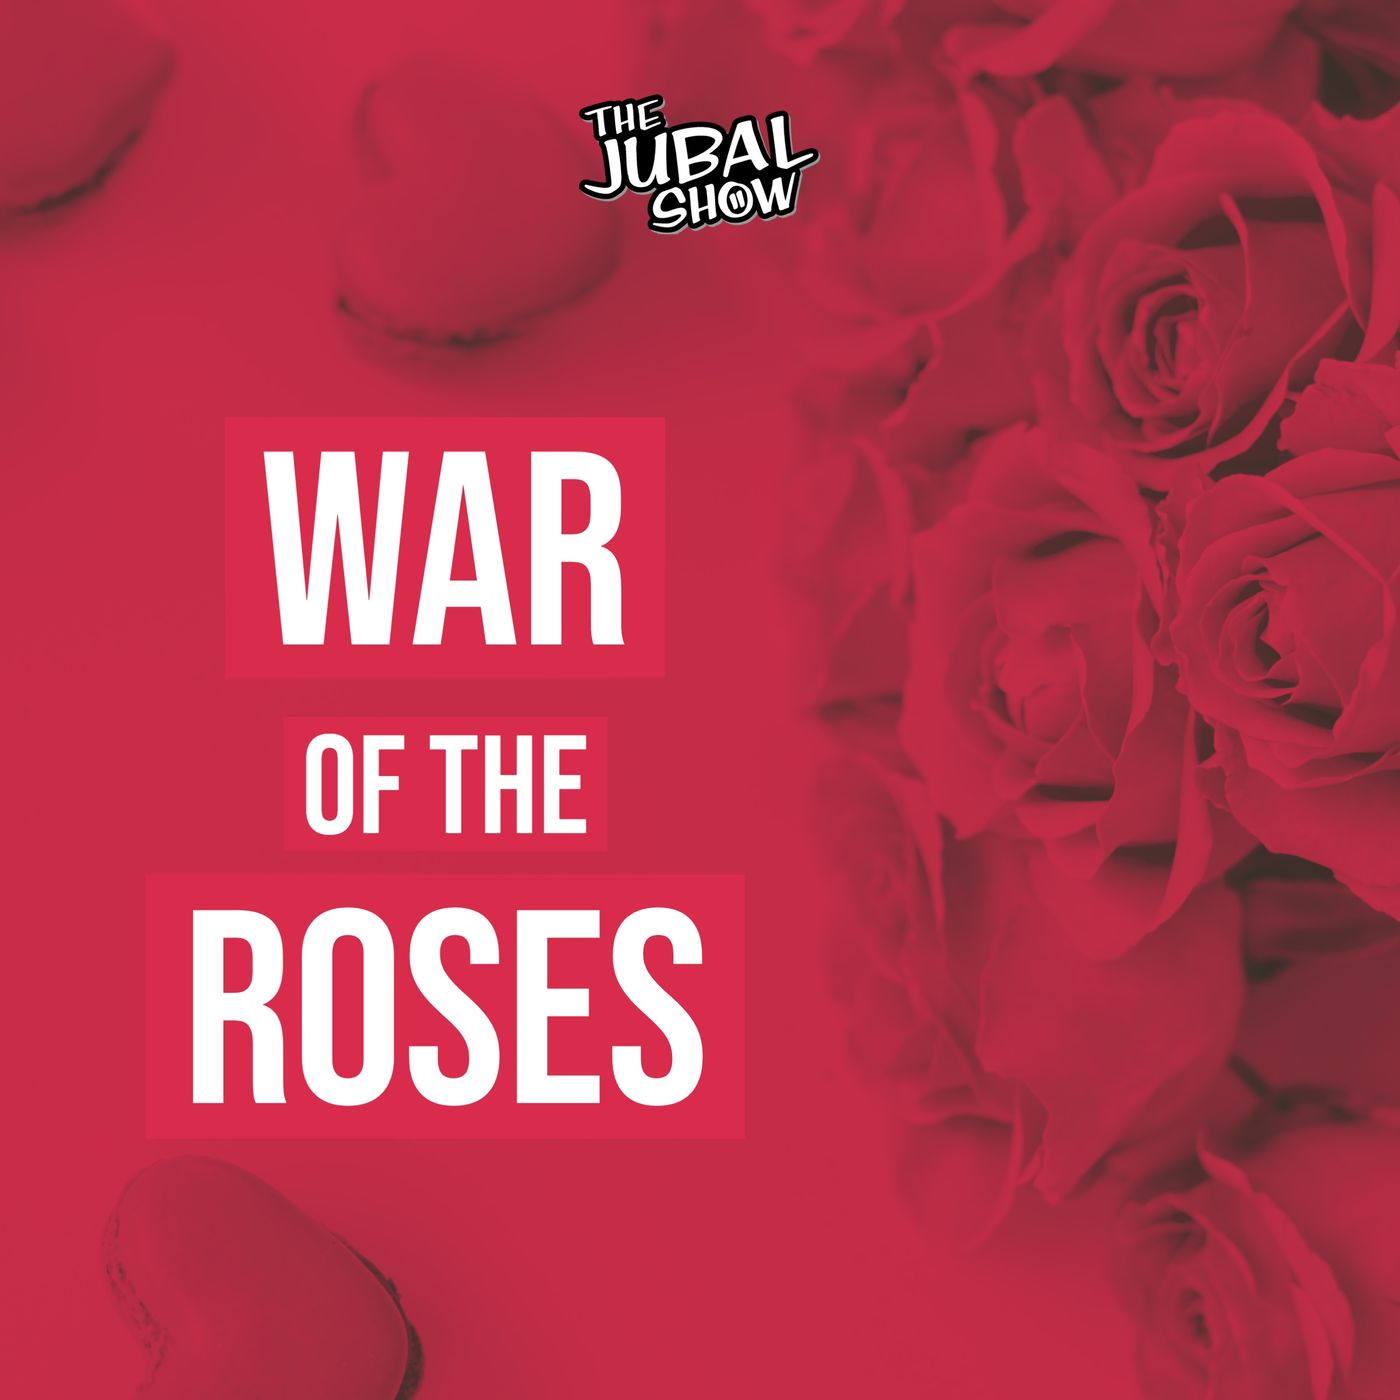 This War of the Roses has to be the the dumbest way to get caught cheating!